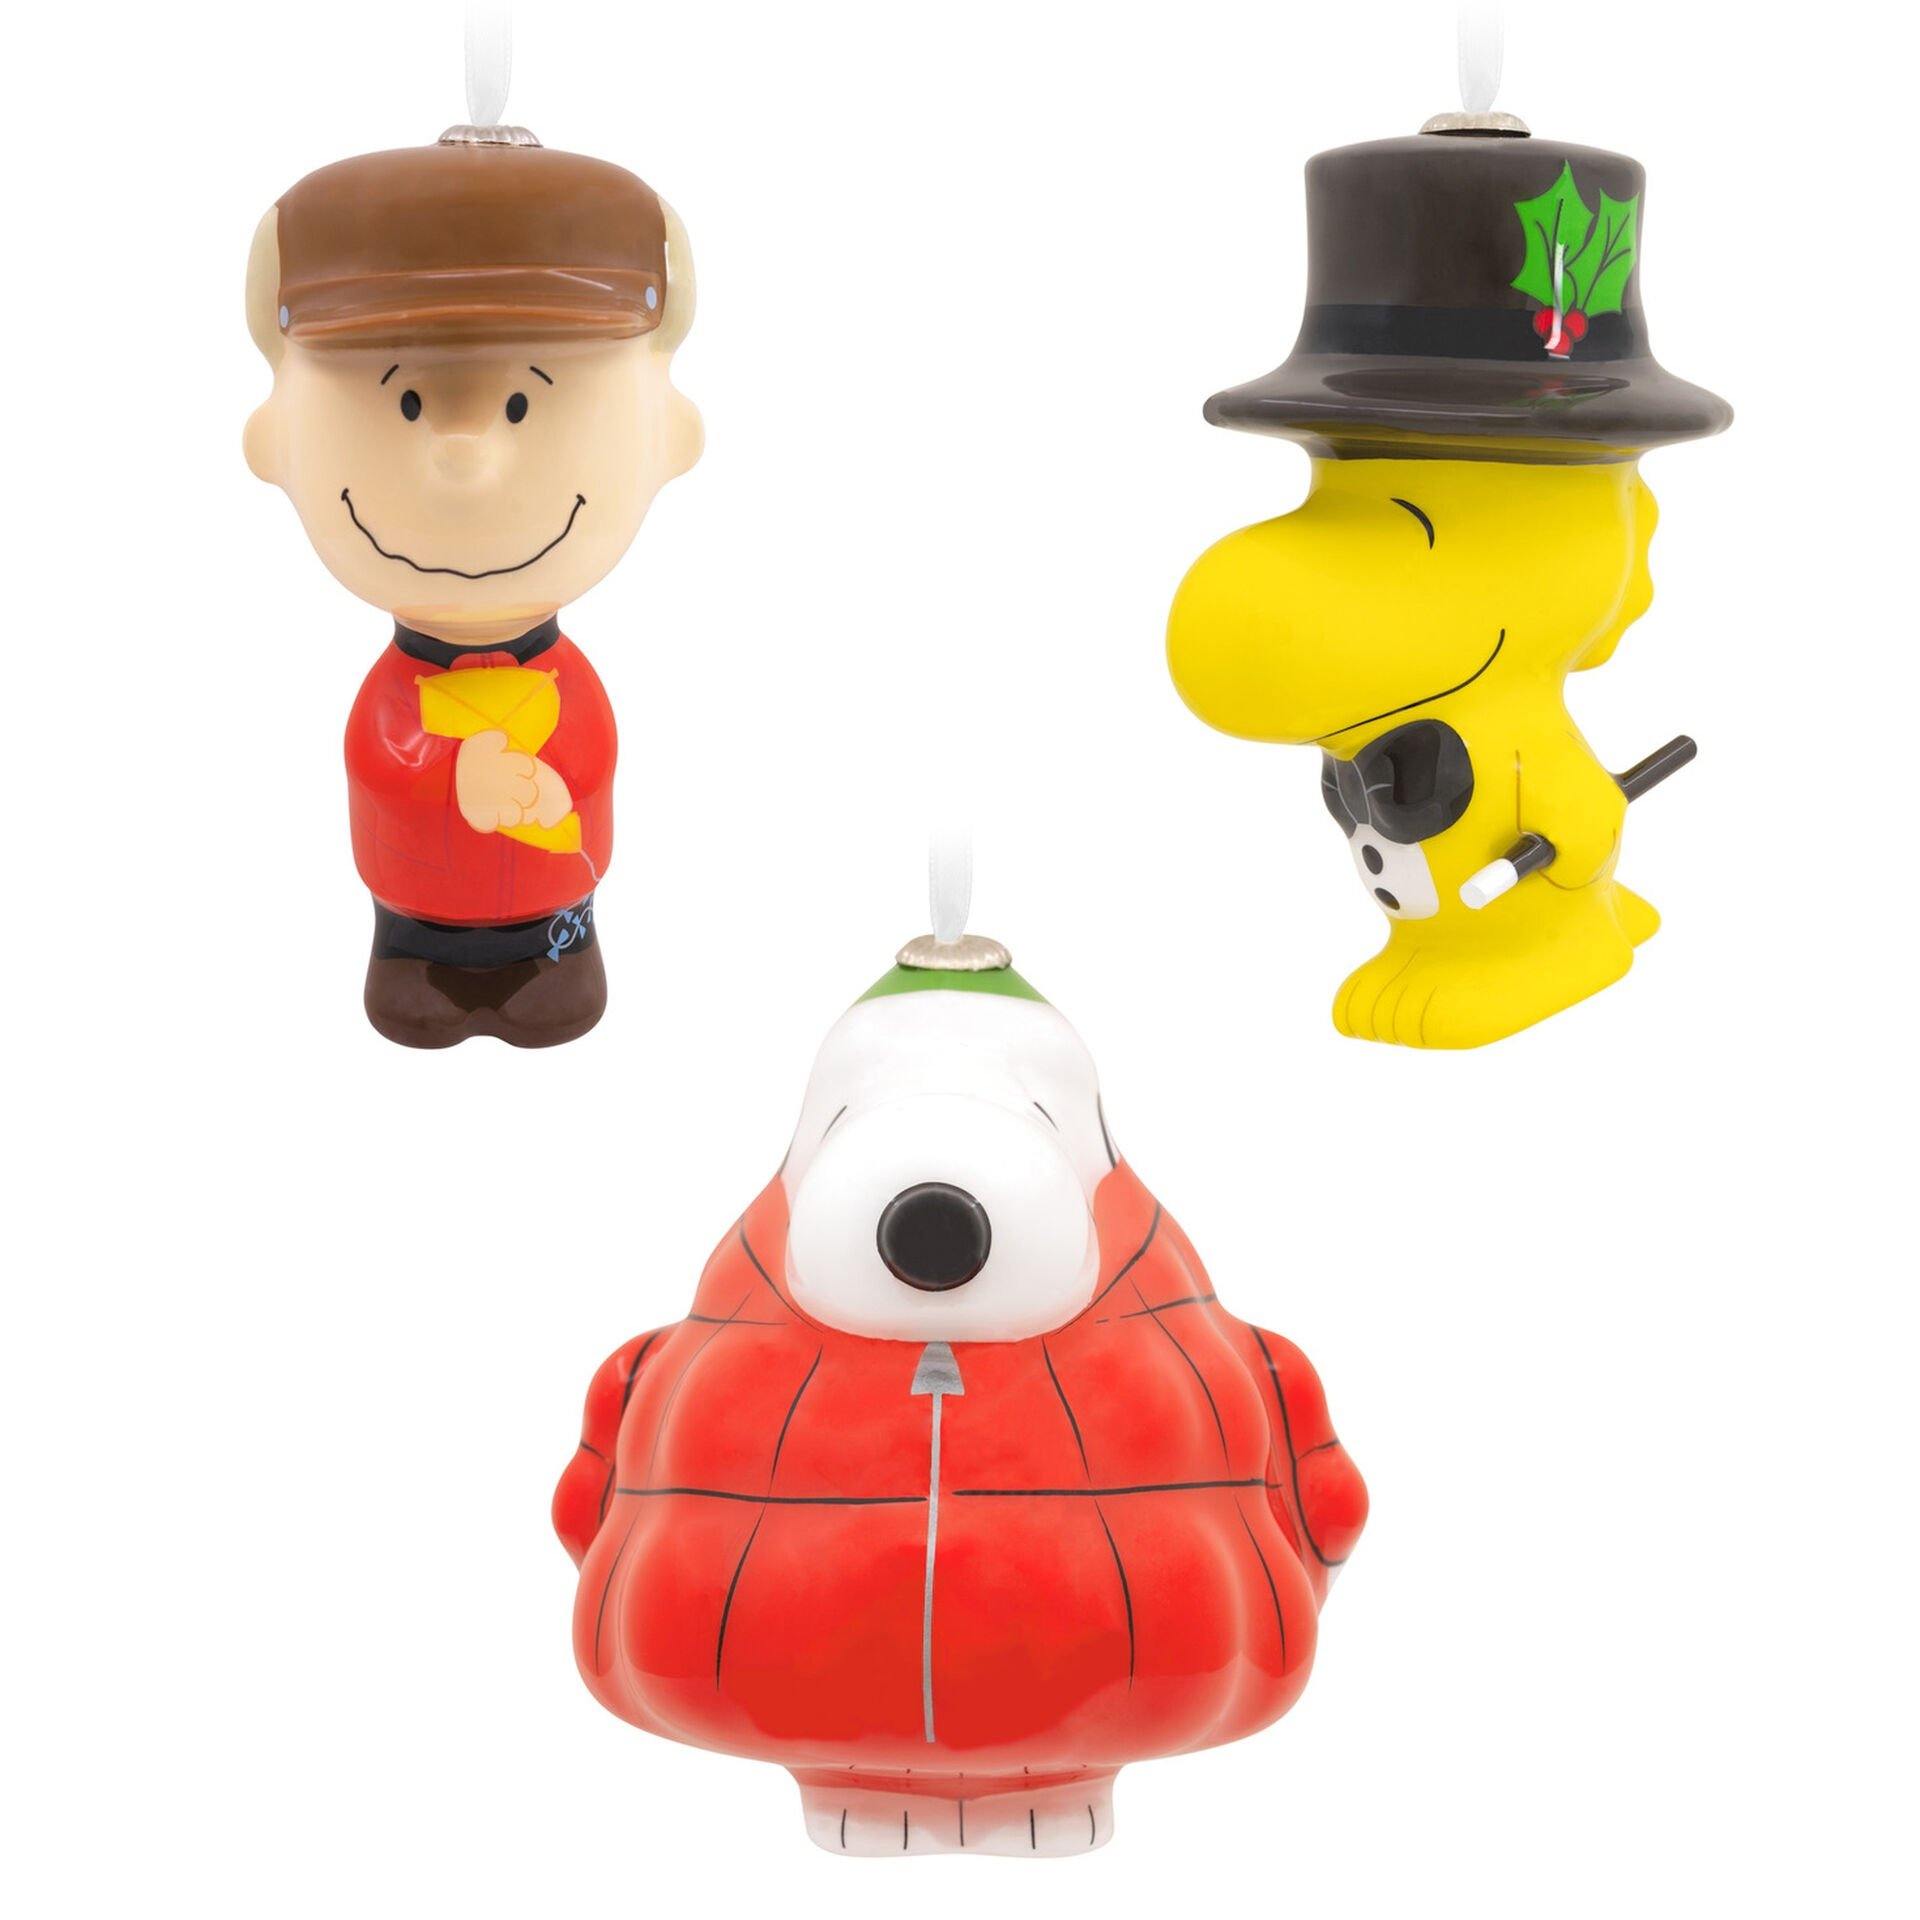 Peanuts® Charlie Brown, Snoopy and Woodstock Decoupage Hallmark Ornaments, Set of 3